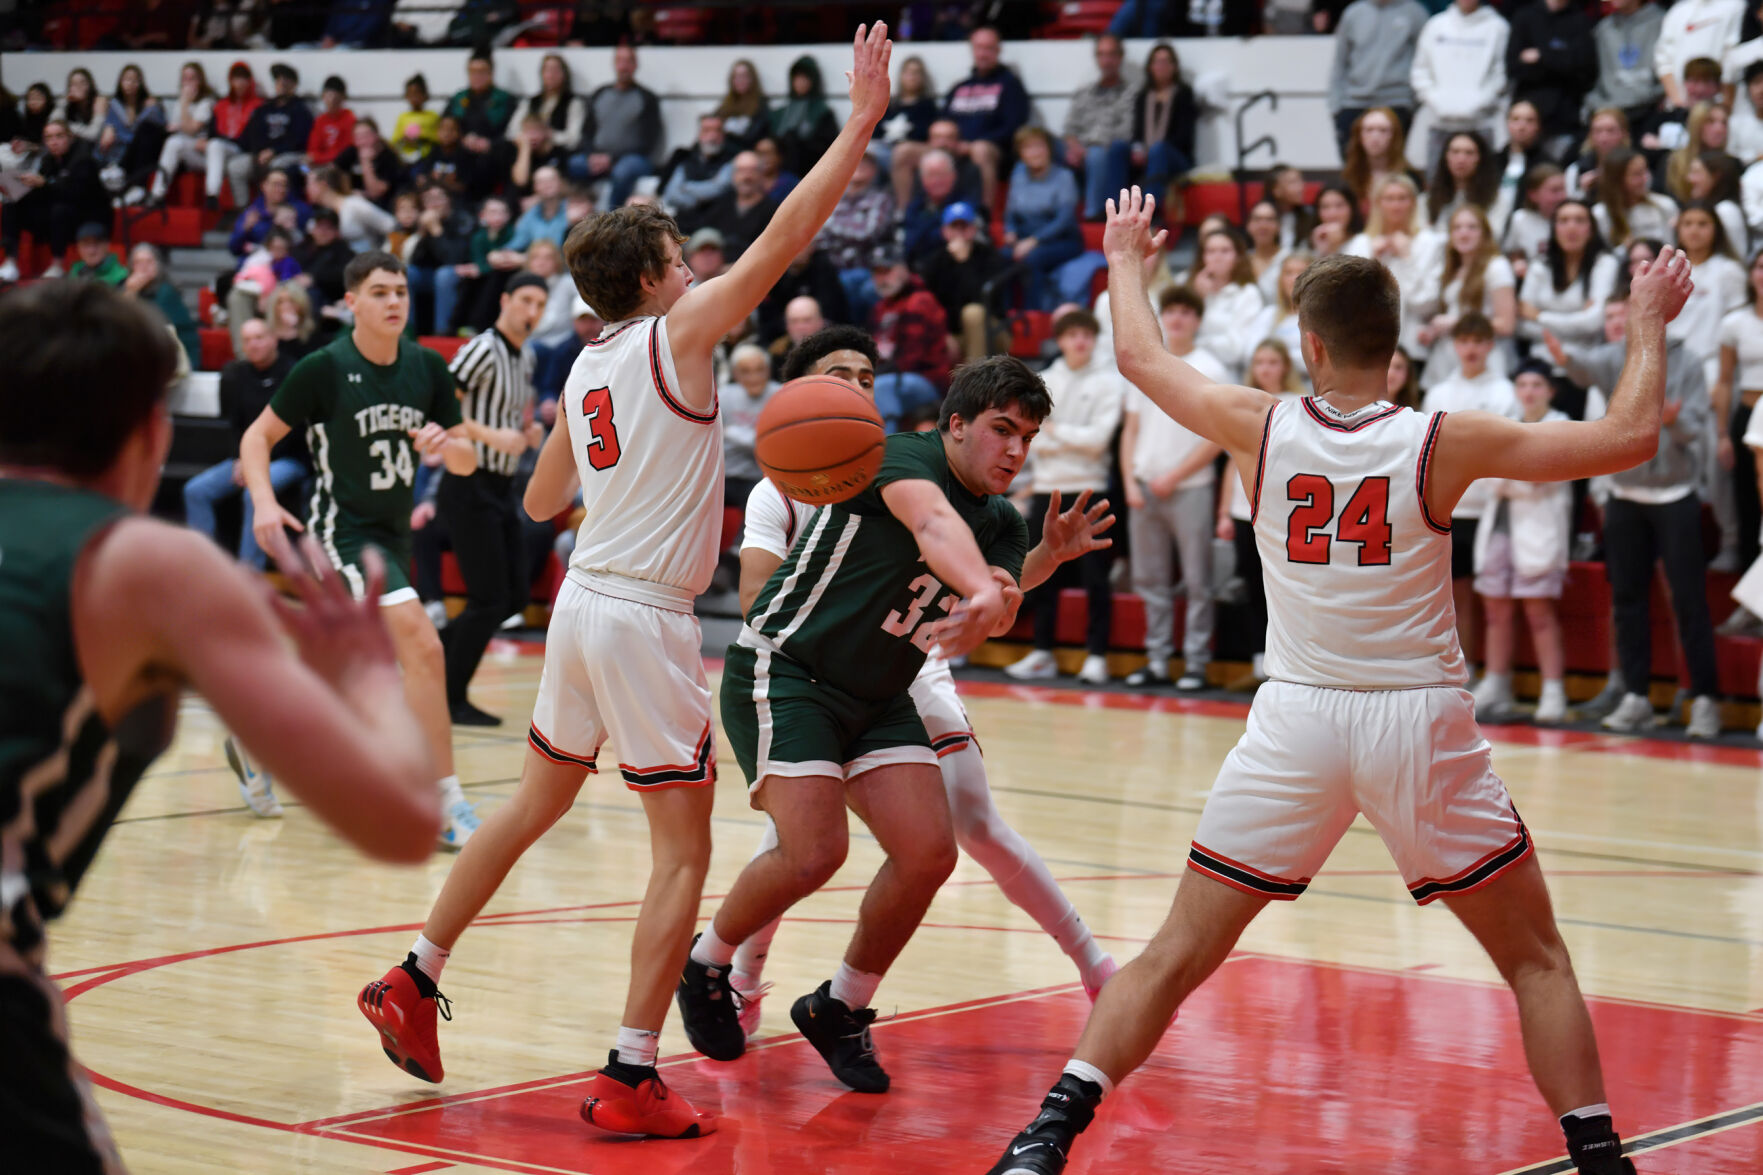 High School Basketball Games of the Week: Exciting Matchups and League Standings Update